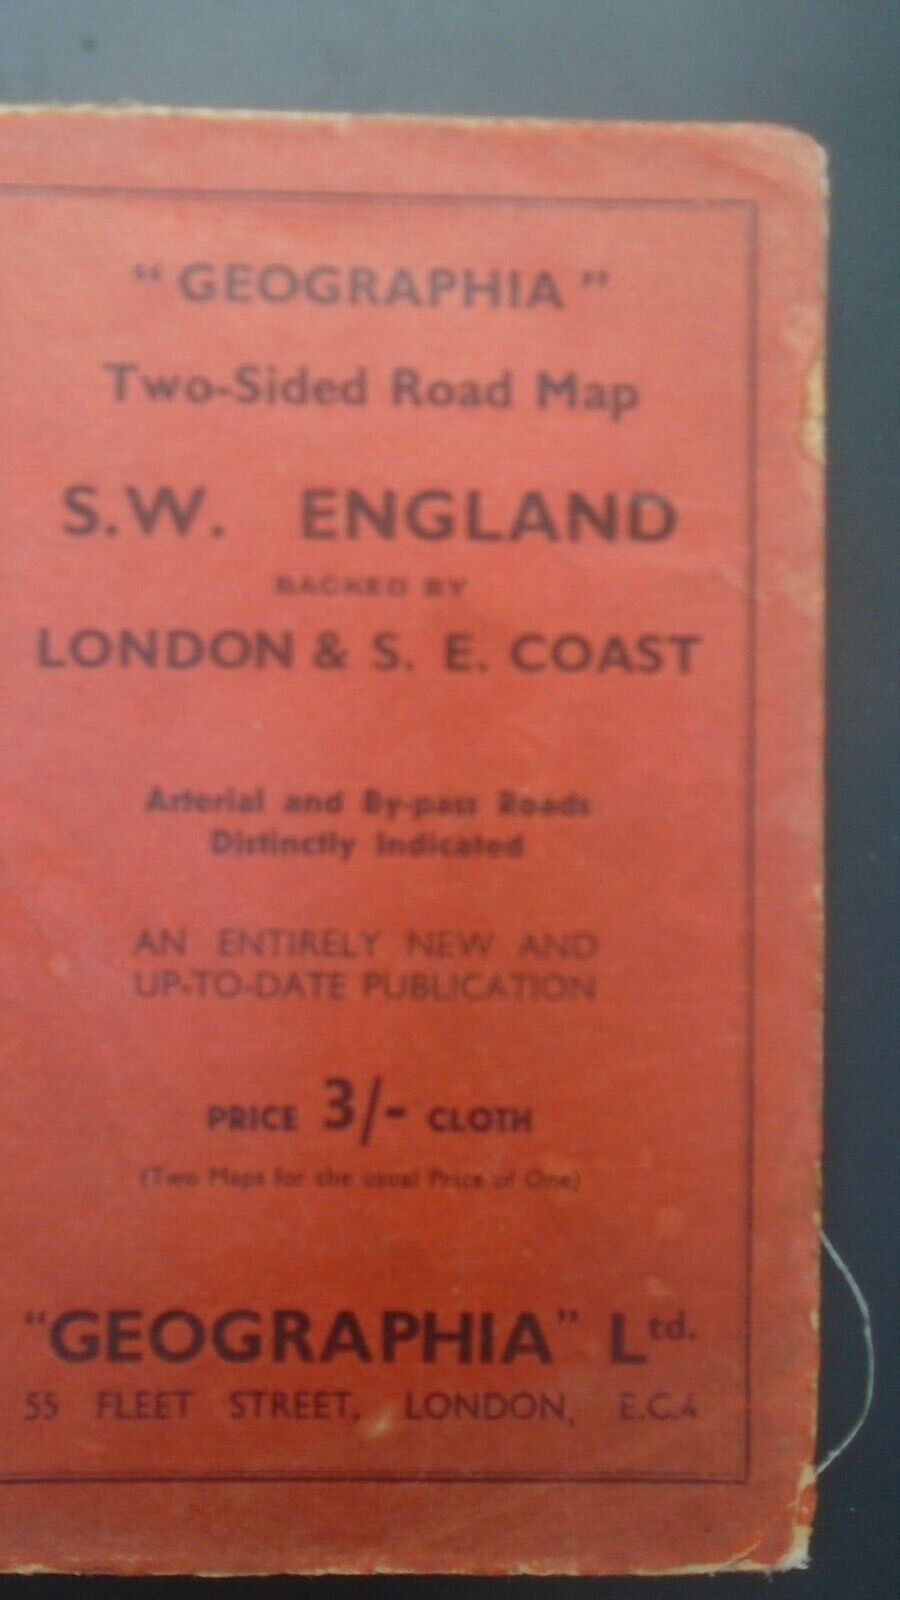 Antique Valuations: RARE CLOTH Geographia 1930? London, Portsmouth, Oxford, Isle of Wight, Plymouth